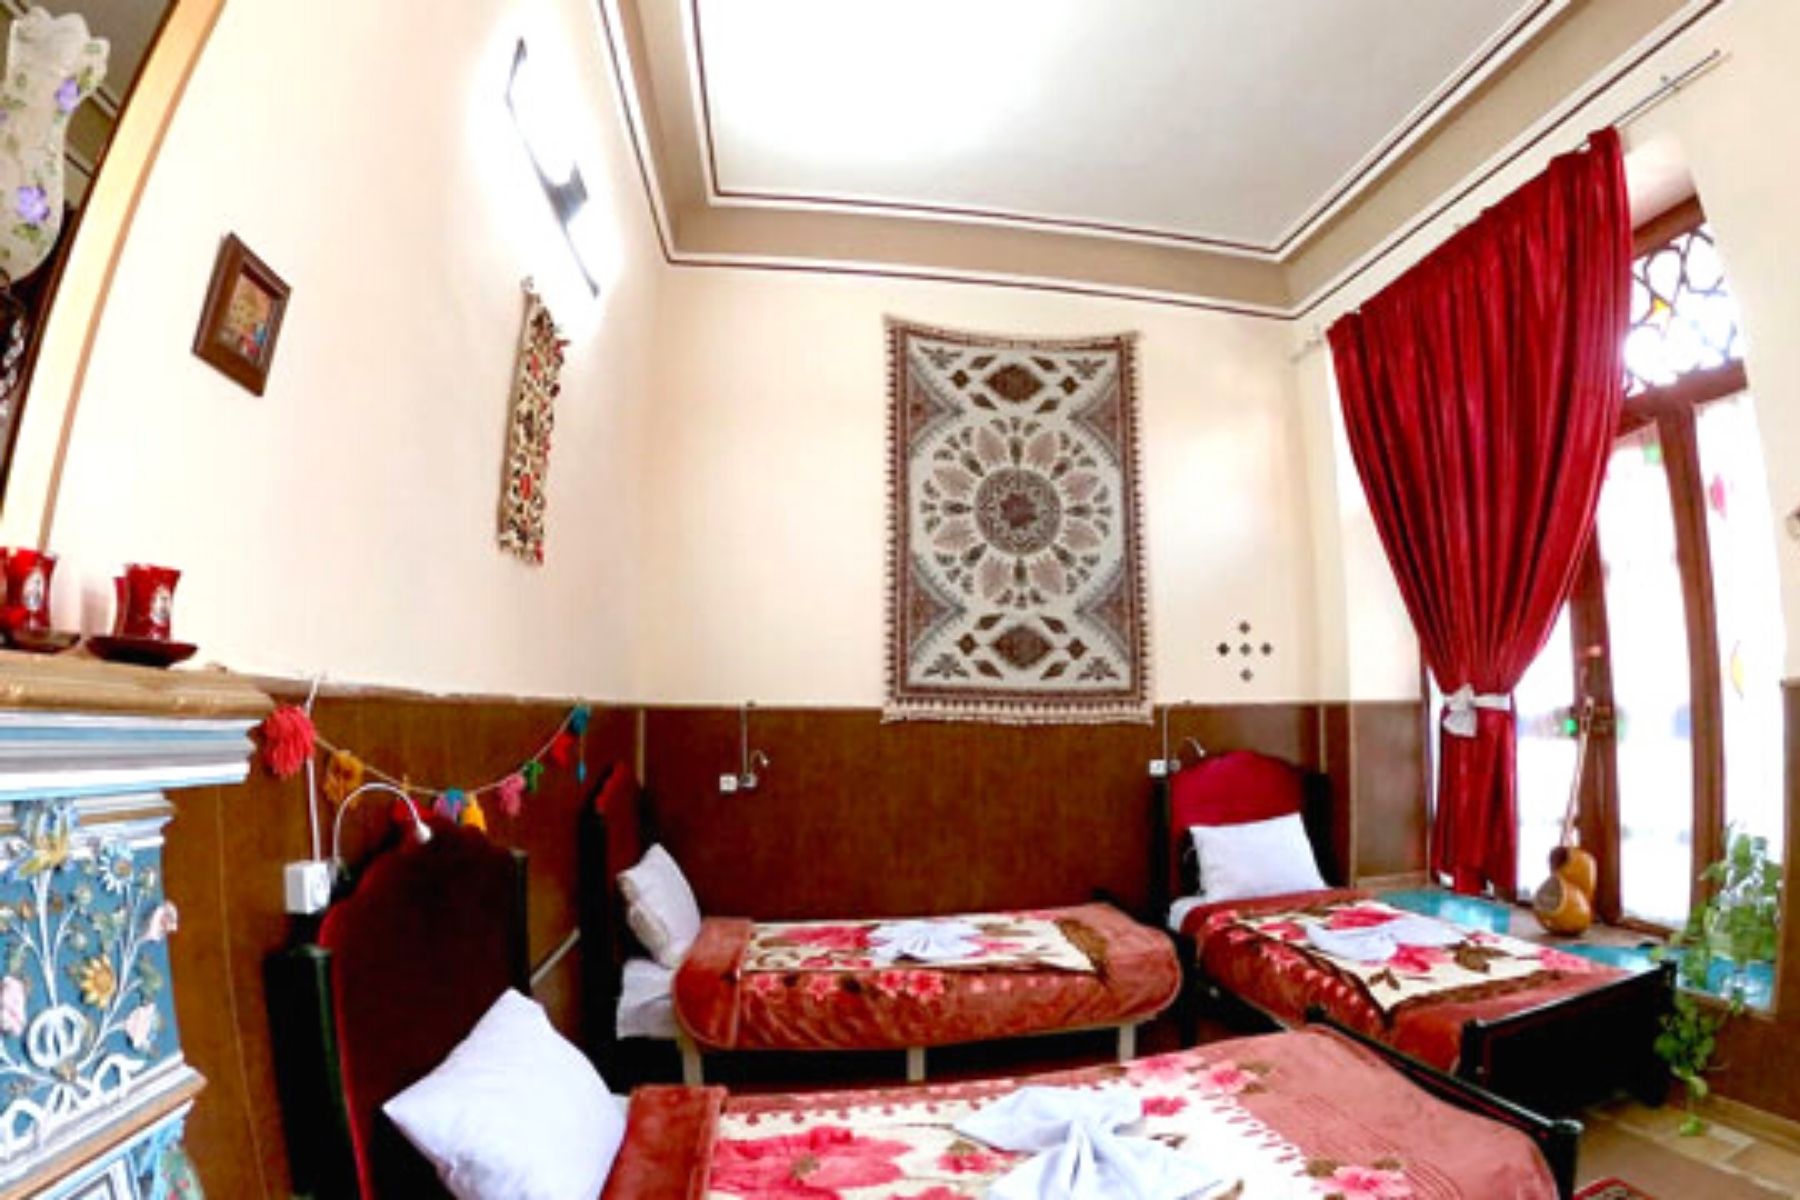 Nargol guest house of Esfahan